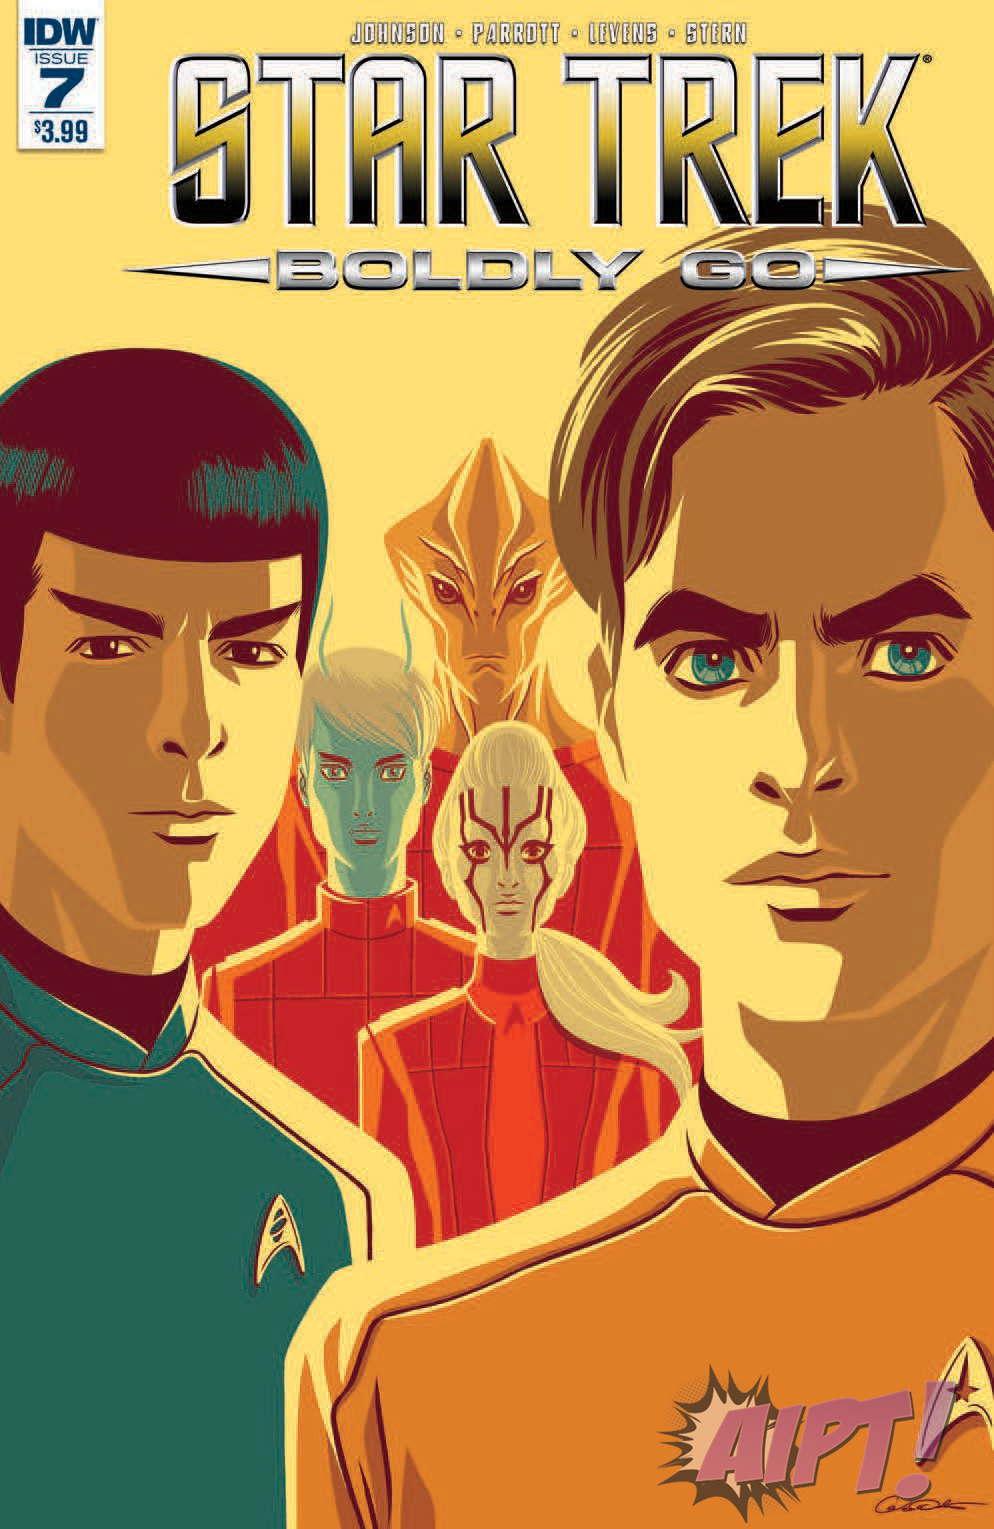 [EXCLUSIVE] IDW Preview: Star Trek: Boldly Go #7